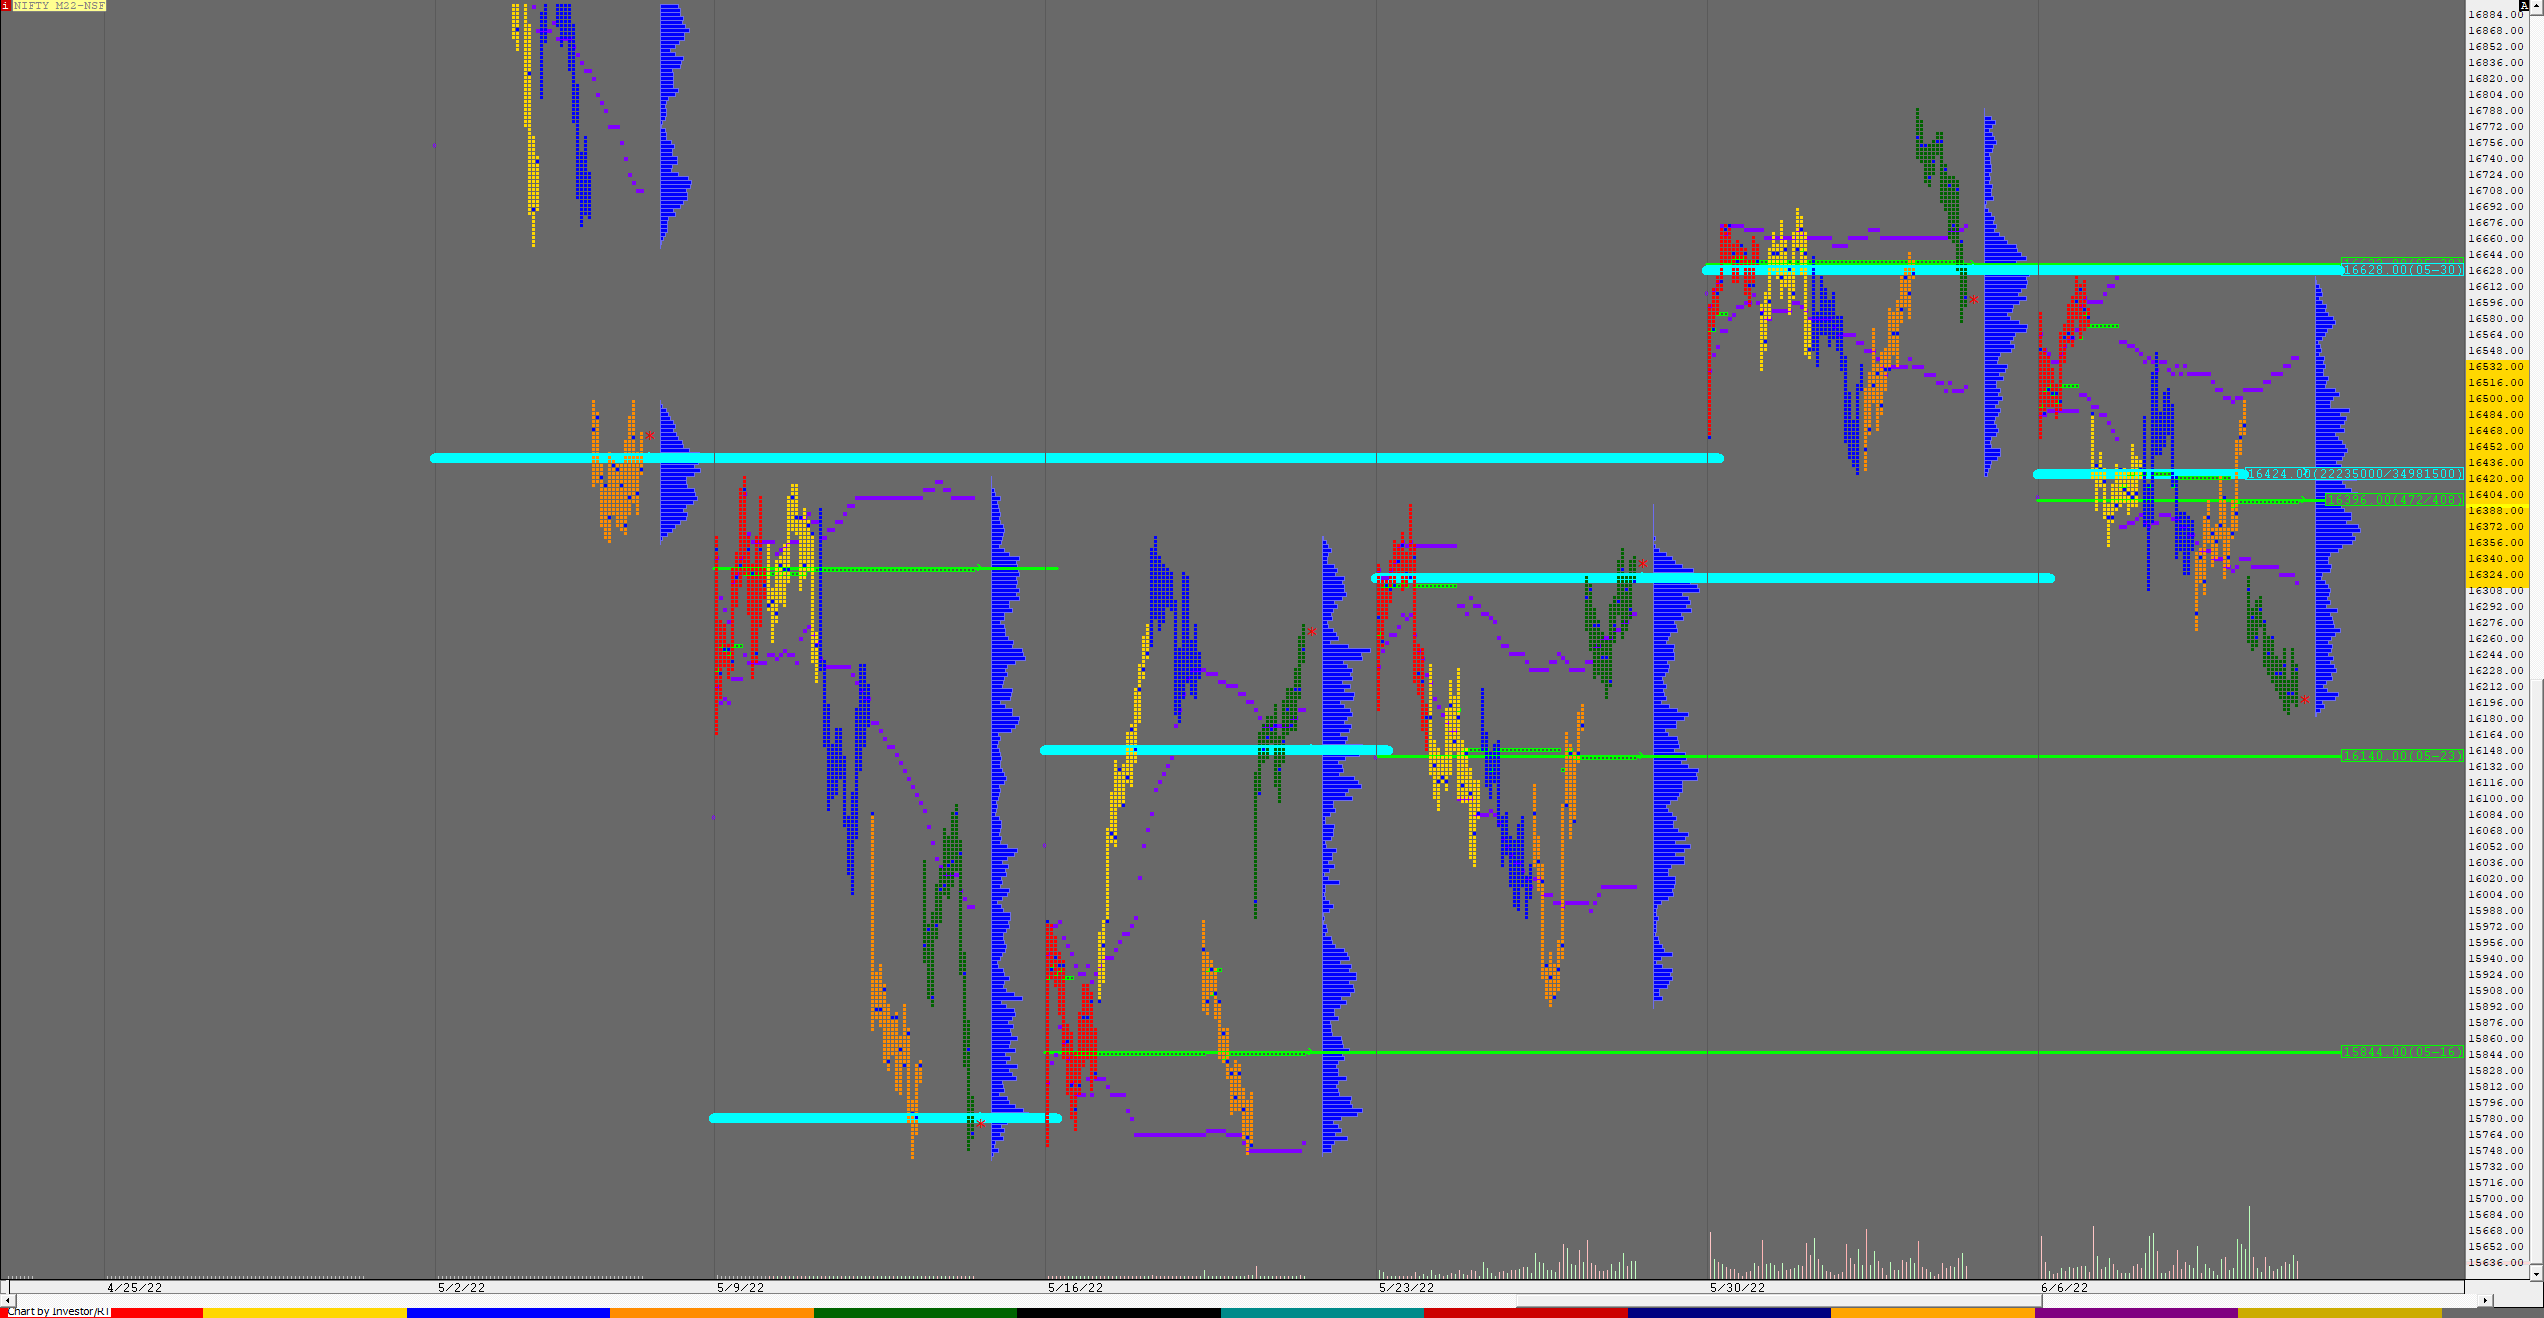 Nf F 1 Weekly Charts (06Th To 10Th Jun 2022) And Market Profile Analysis Banknifty Futures, Charts, Day Trading, Intraday Trading, Intraday Trading Strategies, Market Profile, Market Profile Trading Strategies, Nifty Futures, Order Flow Analysis, Support And Resistance, Technical Analysis, Trading Strategies, Volume Profile Trading